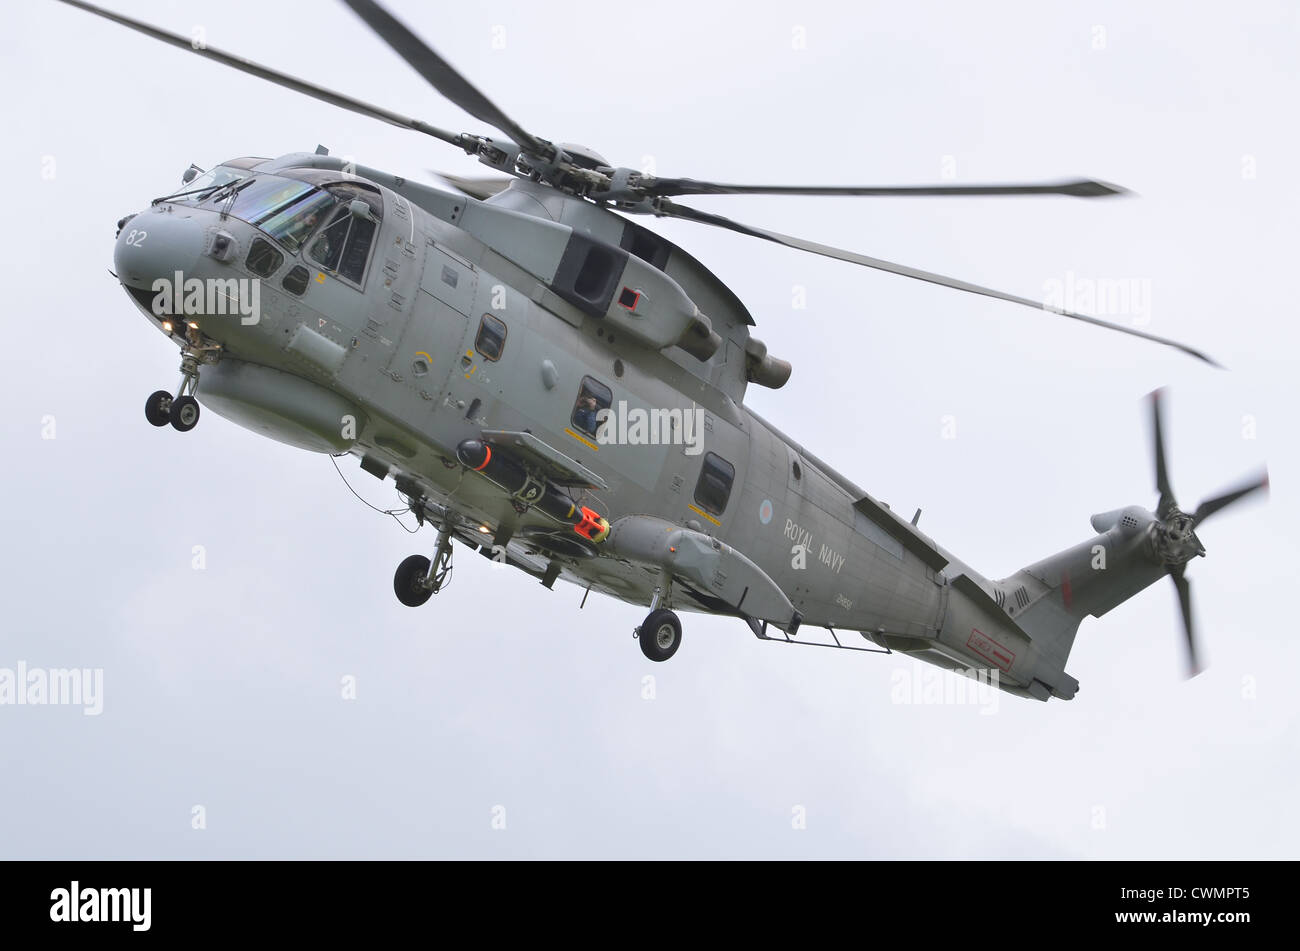 EHI EH-101 Merlin HM1 helicopter operated by the Royal Navy on approach for landing at RAF Fairford Stock Photo